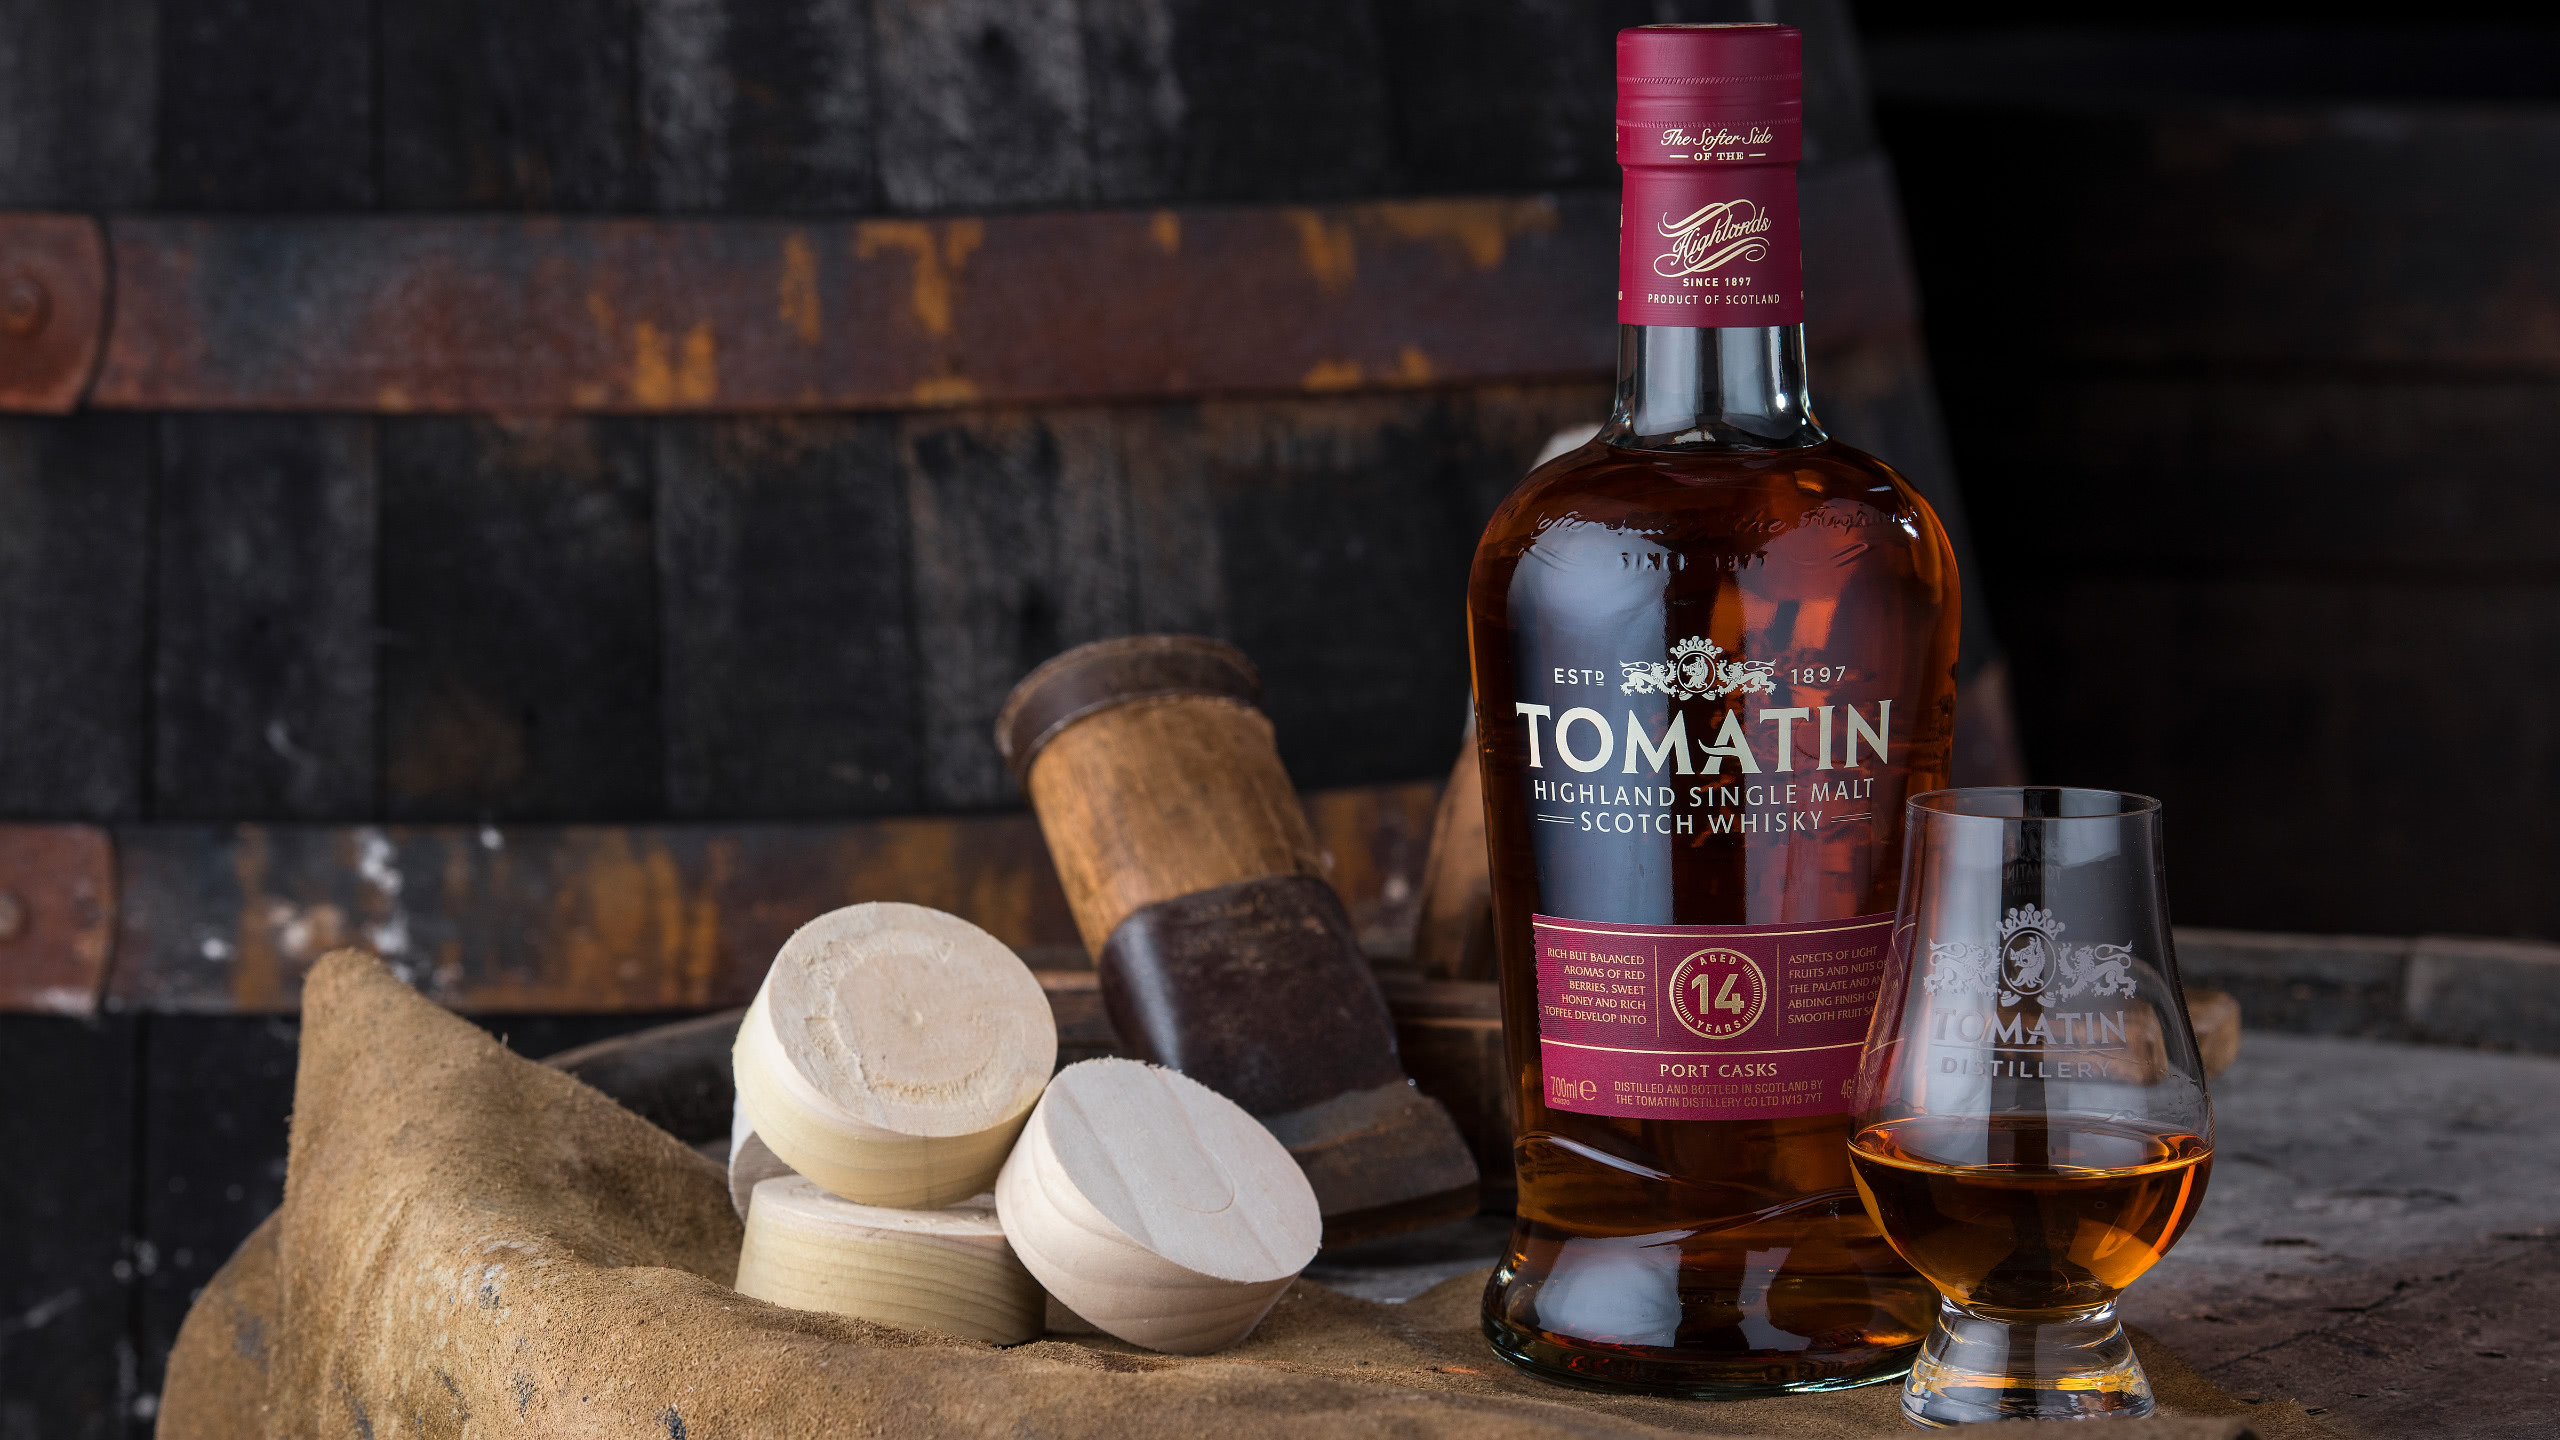 A bottle of Tomatin Whisky on a barrel with some wood disks